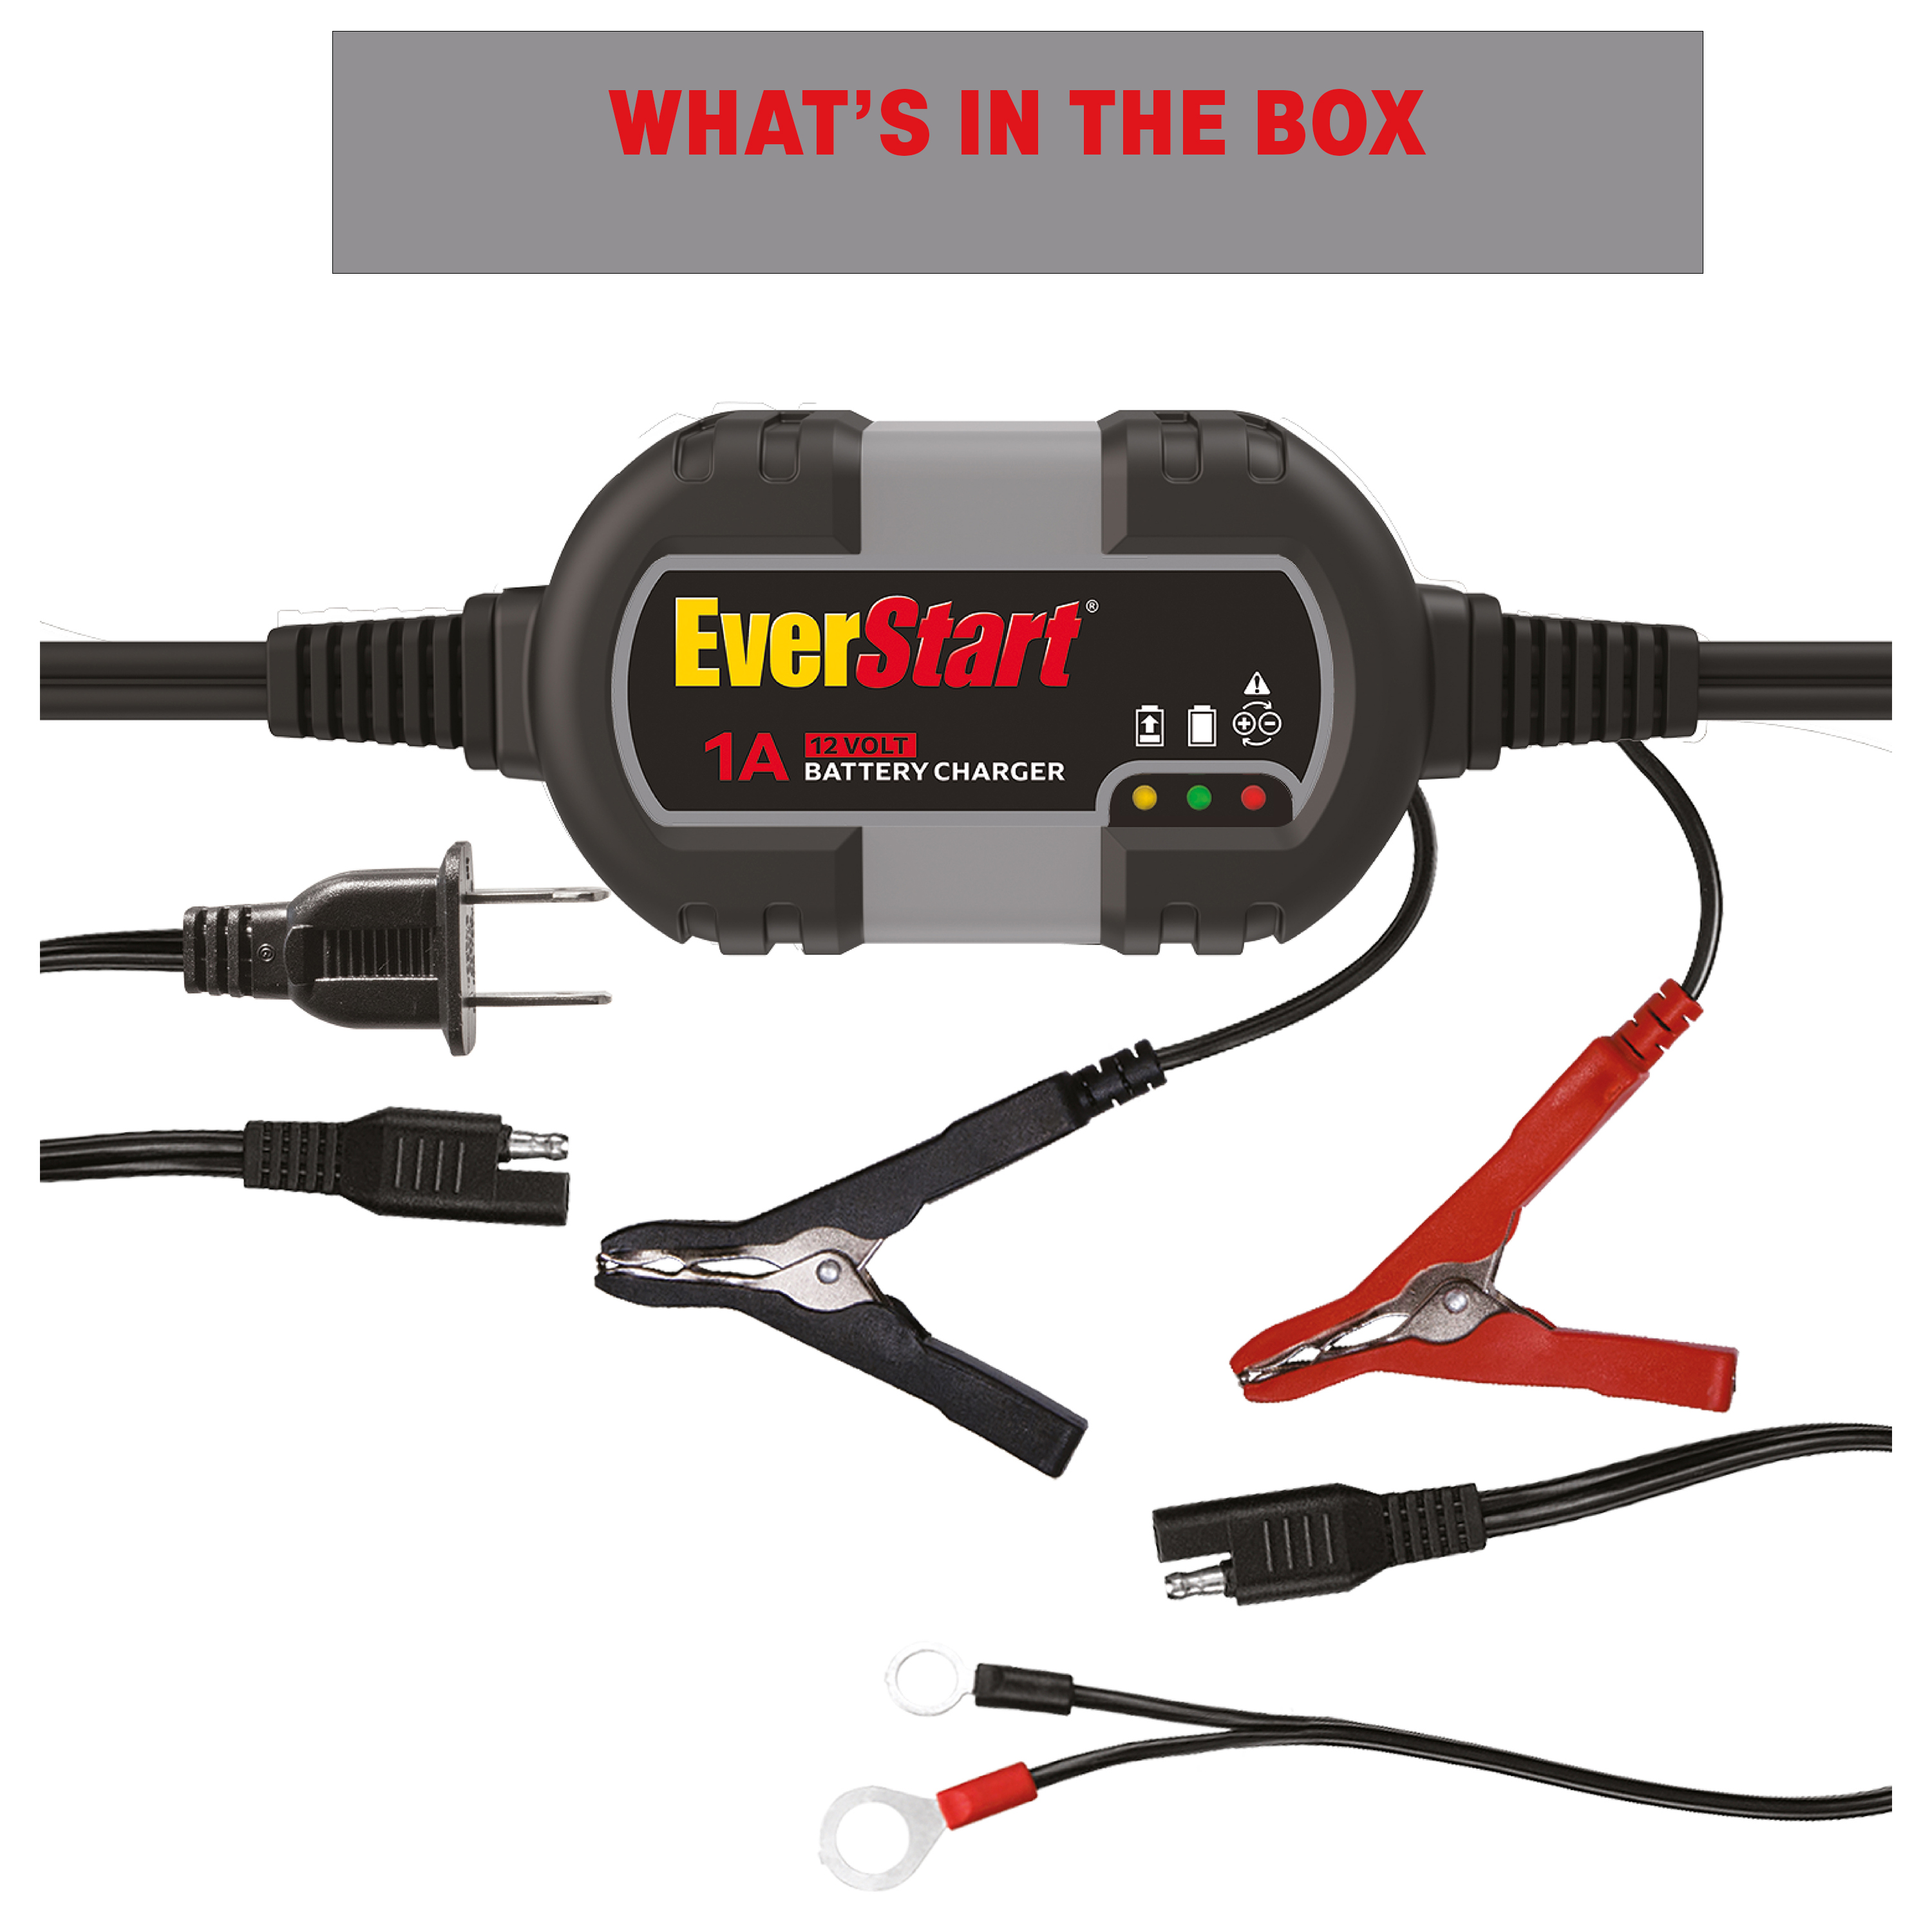 Everstart 12V Automotive/Marine Battery Charger and Maintainer (BM1E) New - image 5 of 7